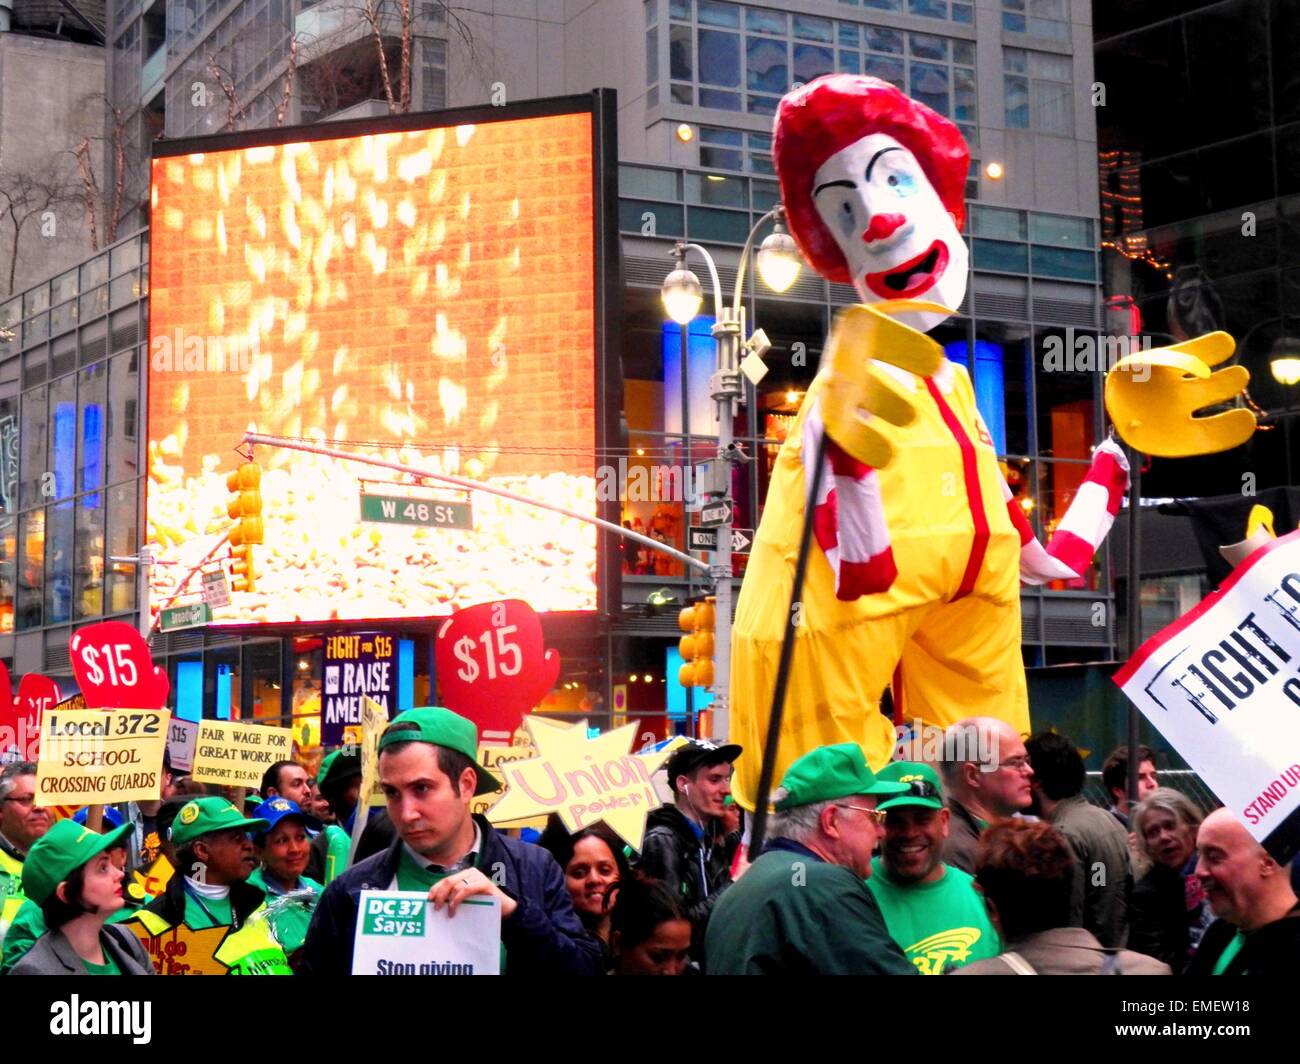 New York, United States. 15th Apr, 2015. A giant sized Ronald McDonald puppet is carried in the march, to represent the going fast food workers fight for a $15 and hour living wage. Thousands of people took part in the rally and march, community groups, unions, workers, students all calling for a $15 Dollar minimum wage in New York and across the Nation. © Mark Apollo/Pacific Press/Alamy Live News Stock Photo